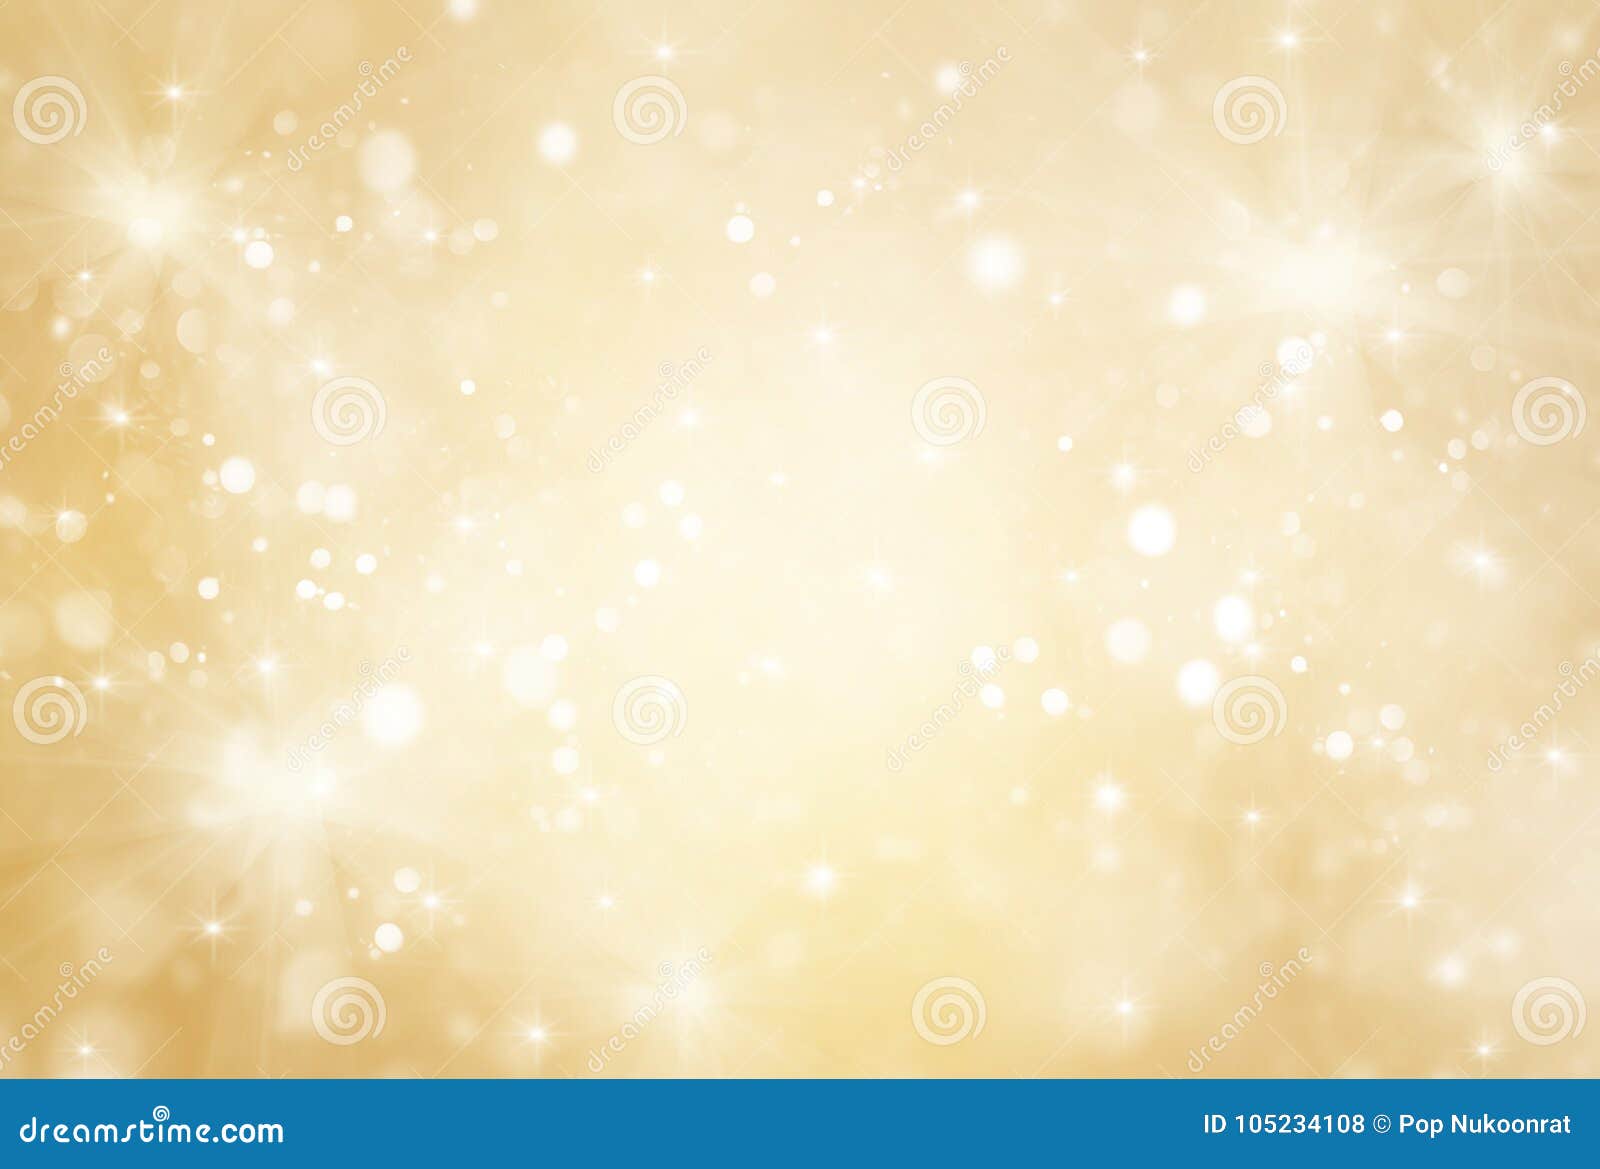 abstract gold and bright glitter for new year background